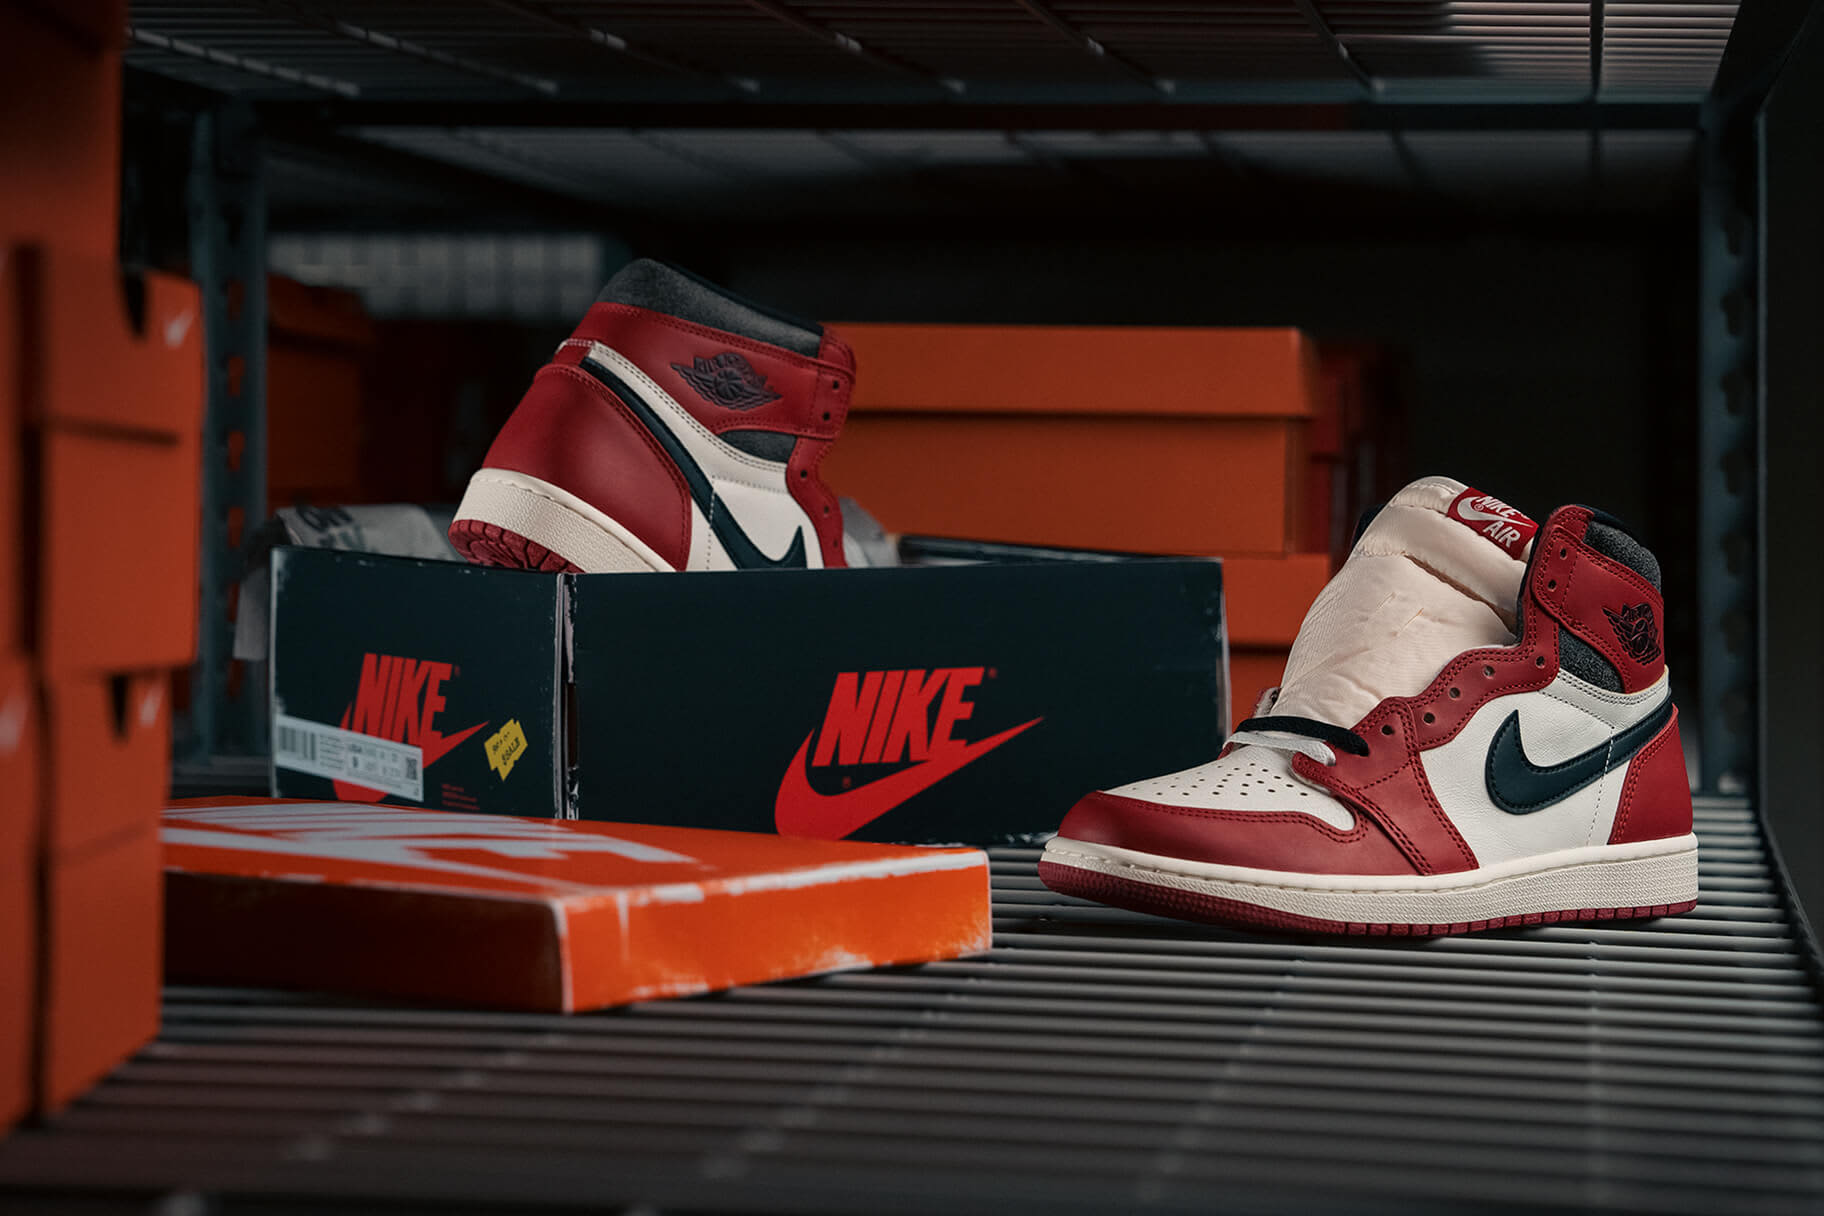 Air Jordan 1 Chicago: The Inspiration Behind the Design